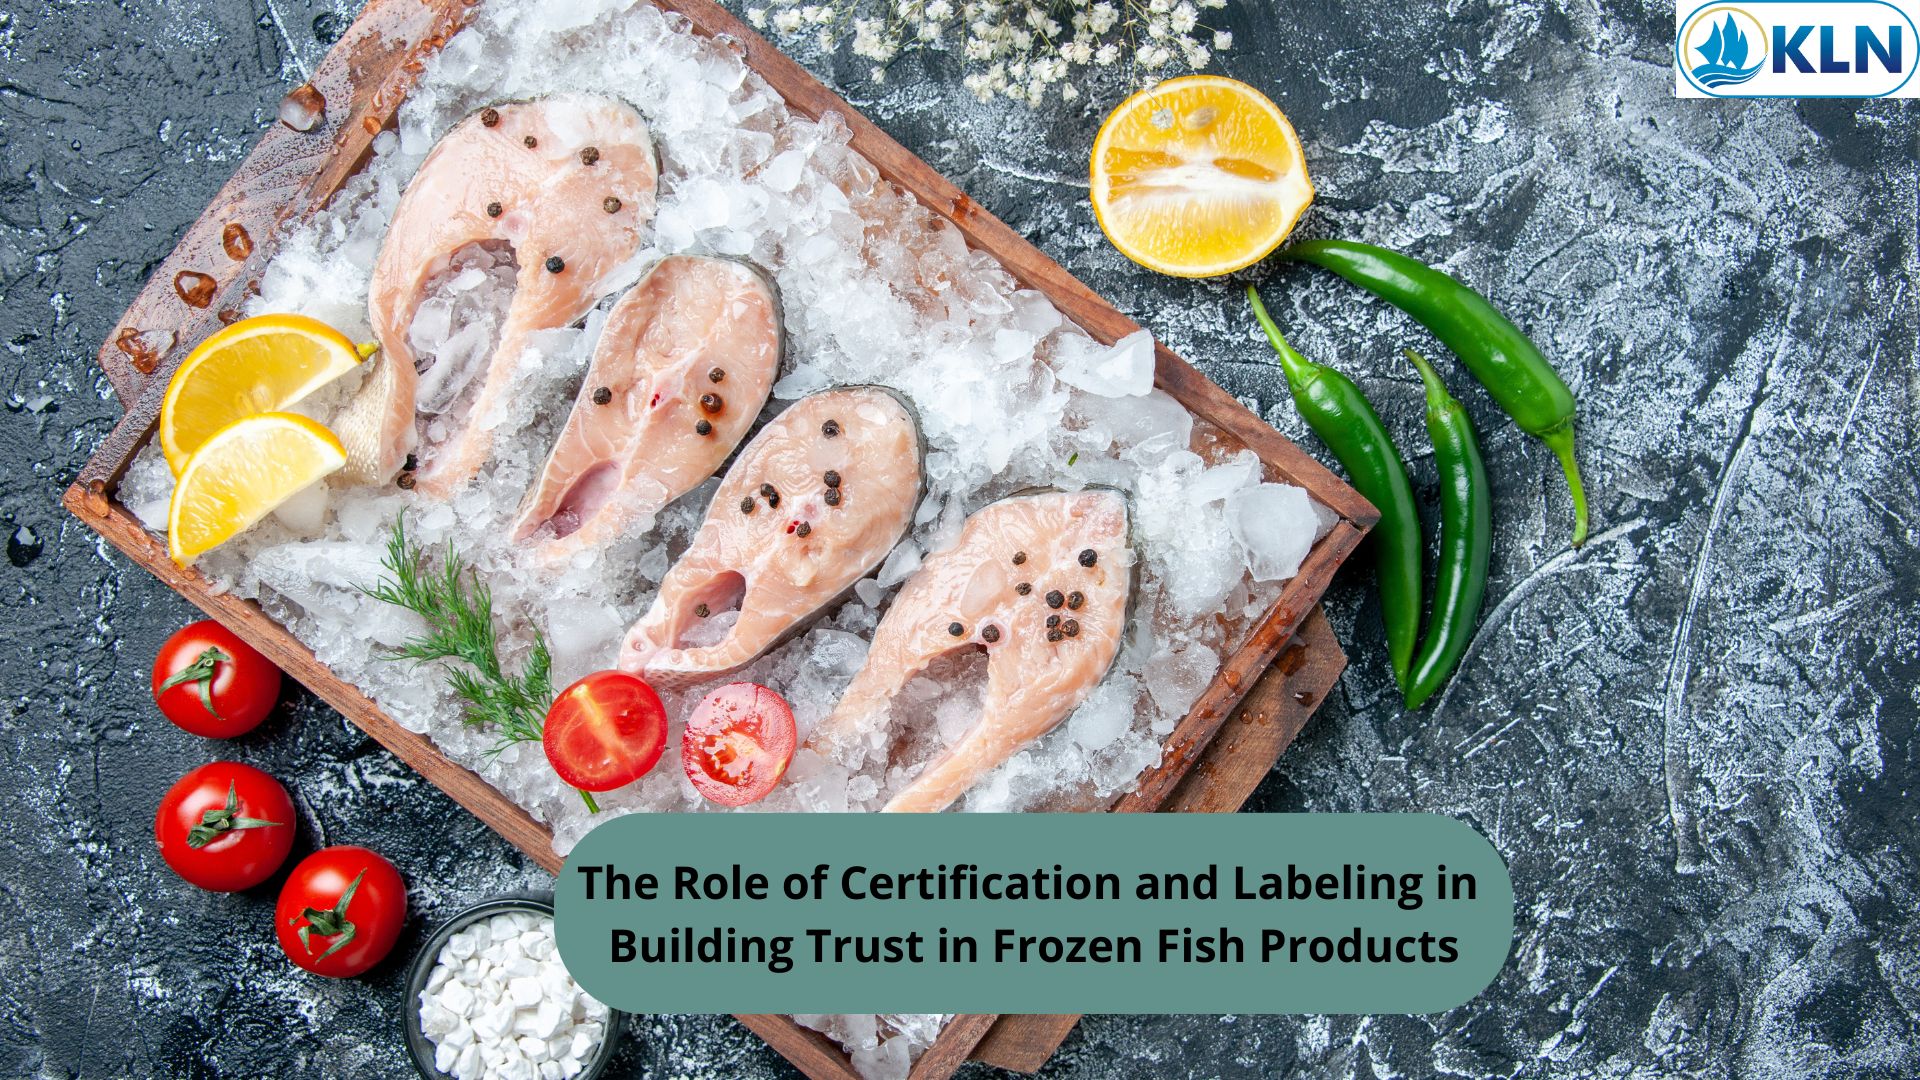 The Role of Certification and Labeling in Building Trust in Frozen Fish Products